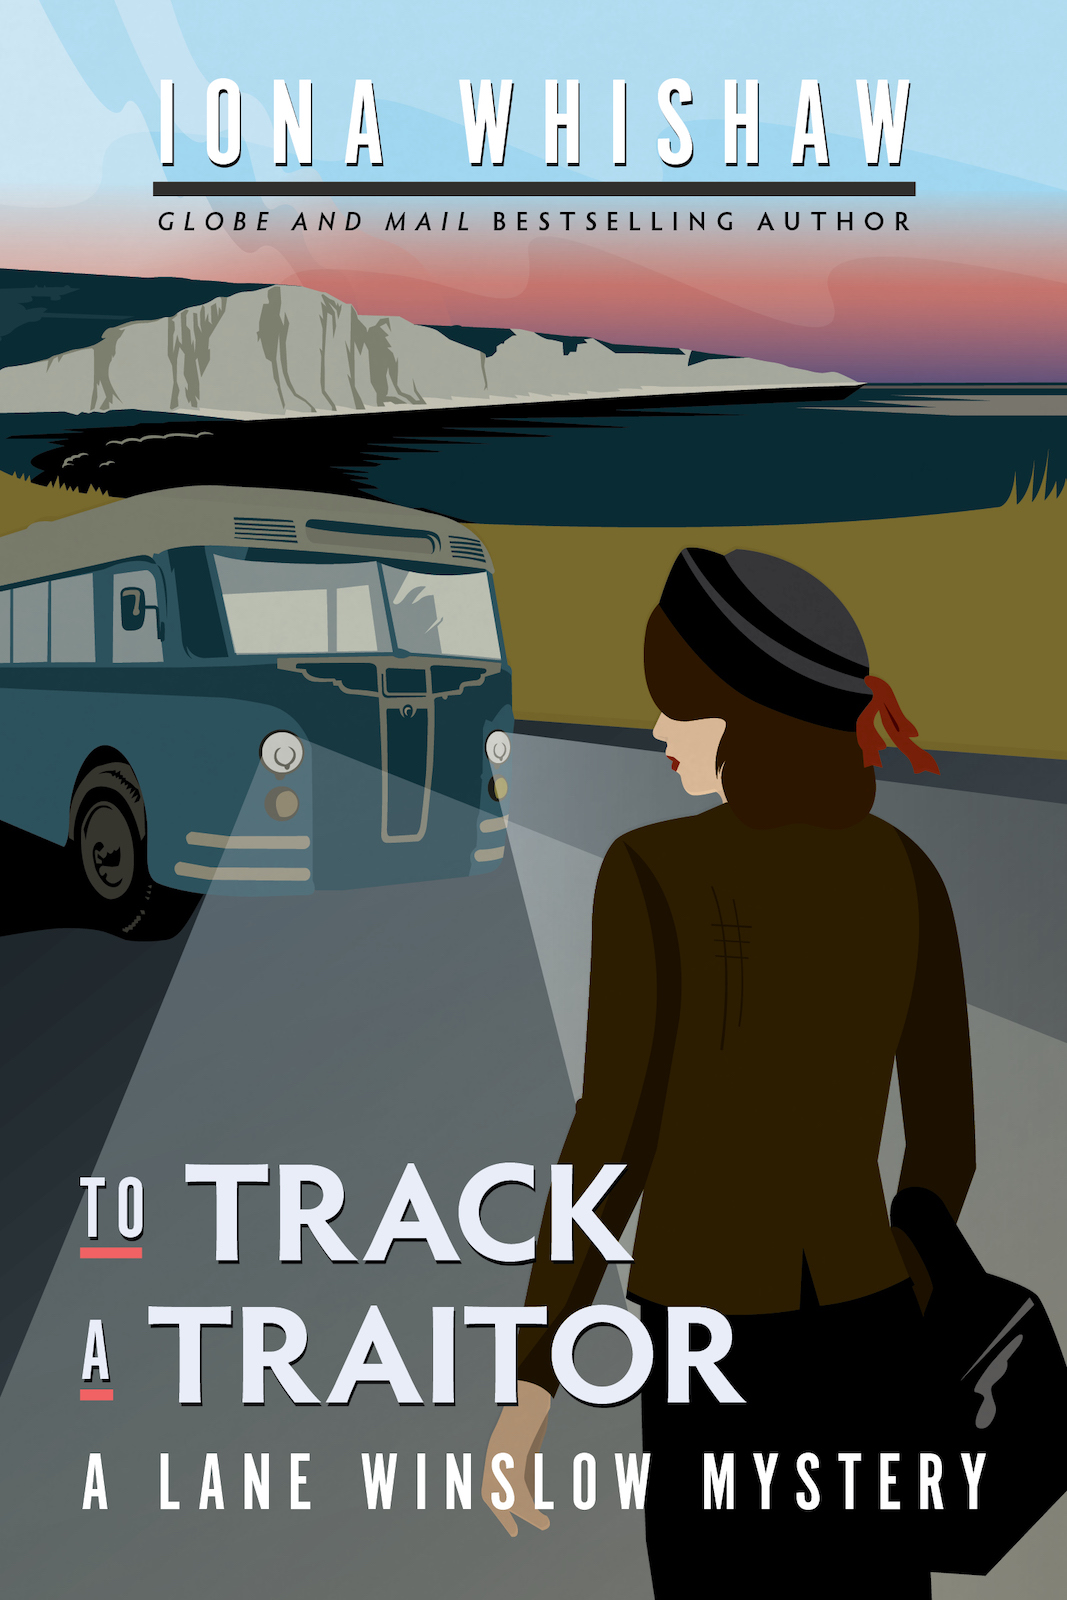 Book cover of To Track a Traitor by Iona Whishaw